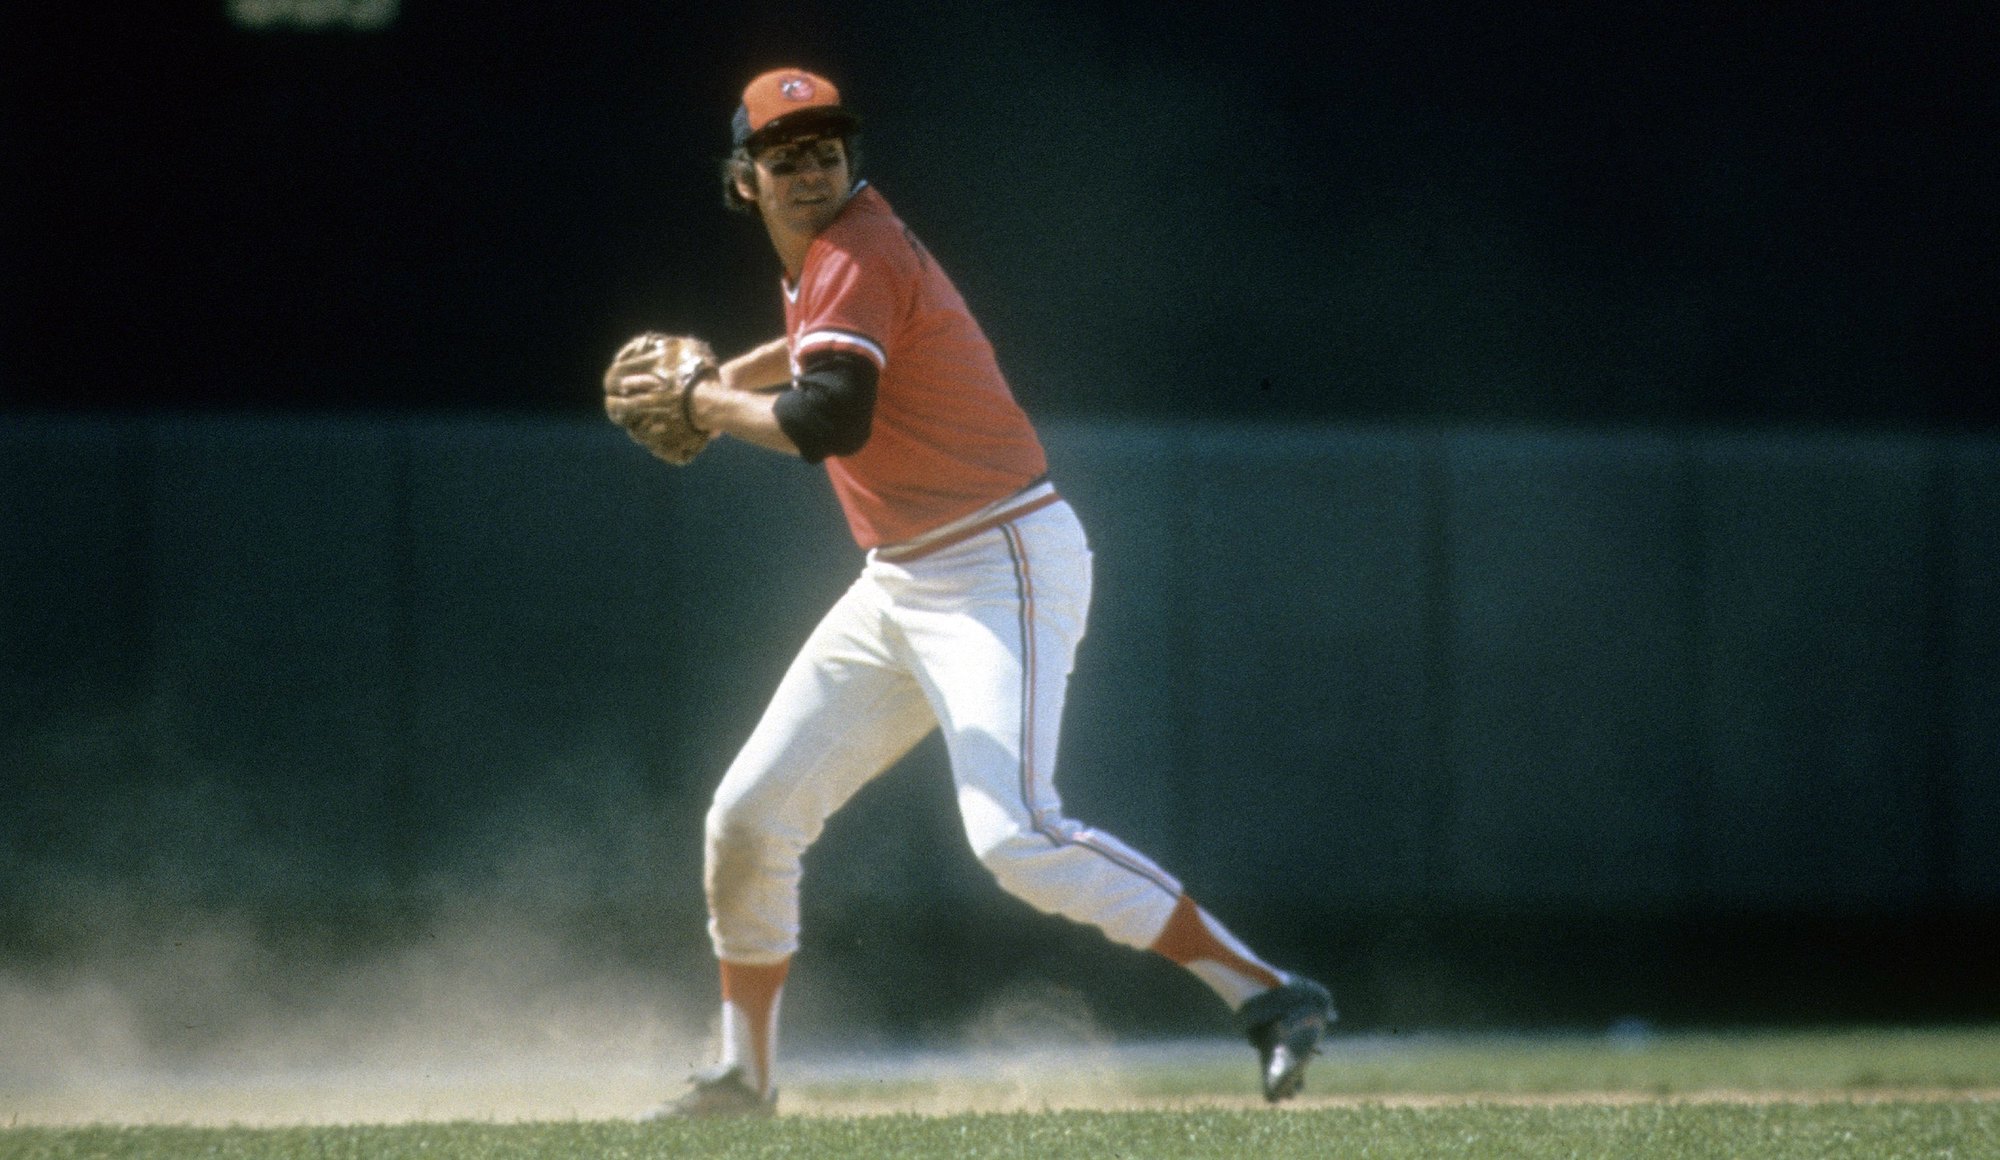 BALTIMORE, MD - CIRCA 1970's: Third baseman Brooks Robinson #5 of the Baltimore Orioles in action sets to make a throw during a circa 1970's Major League Baseball game at Memorial Stadium in Baltimore, Maryland. Robinson played for the Orioles from 1955-77. (Photo by Focus on Sport/Getty Images)